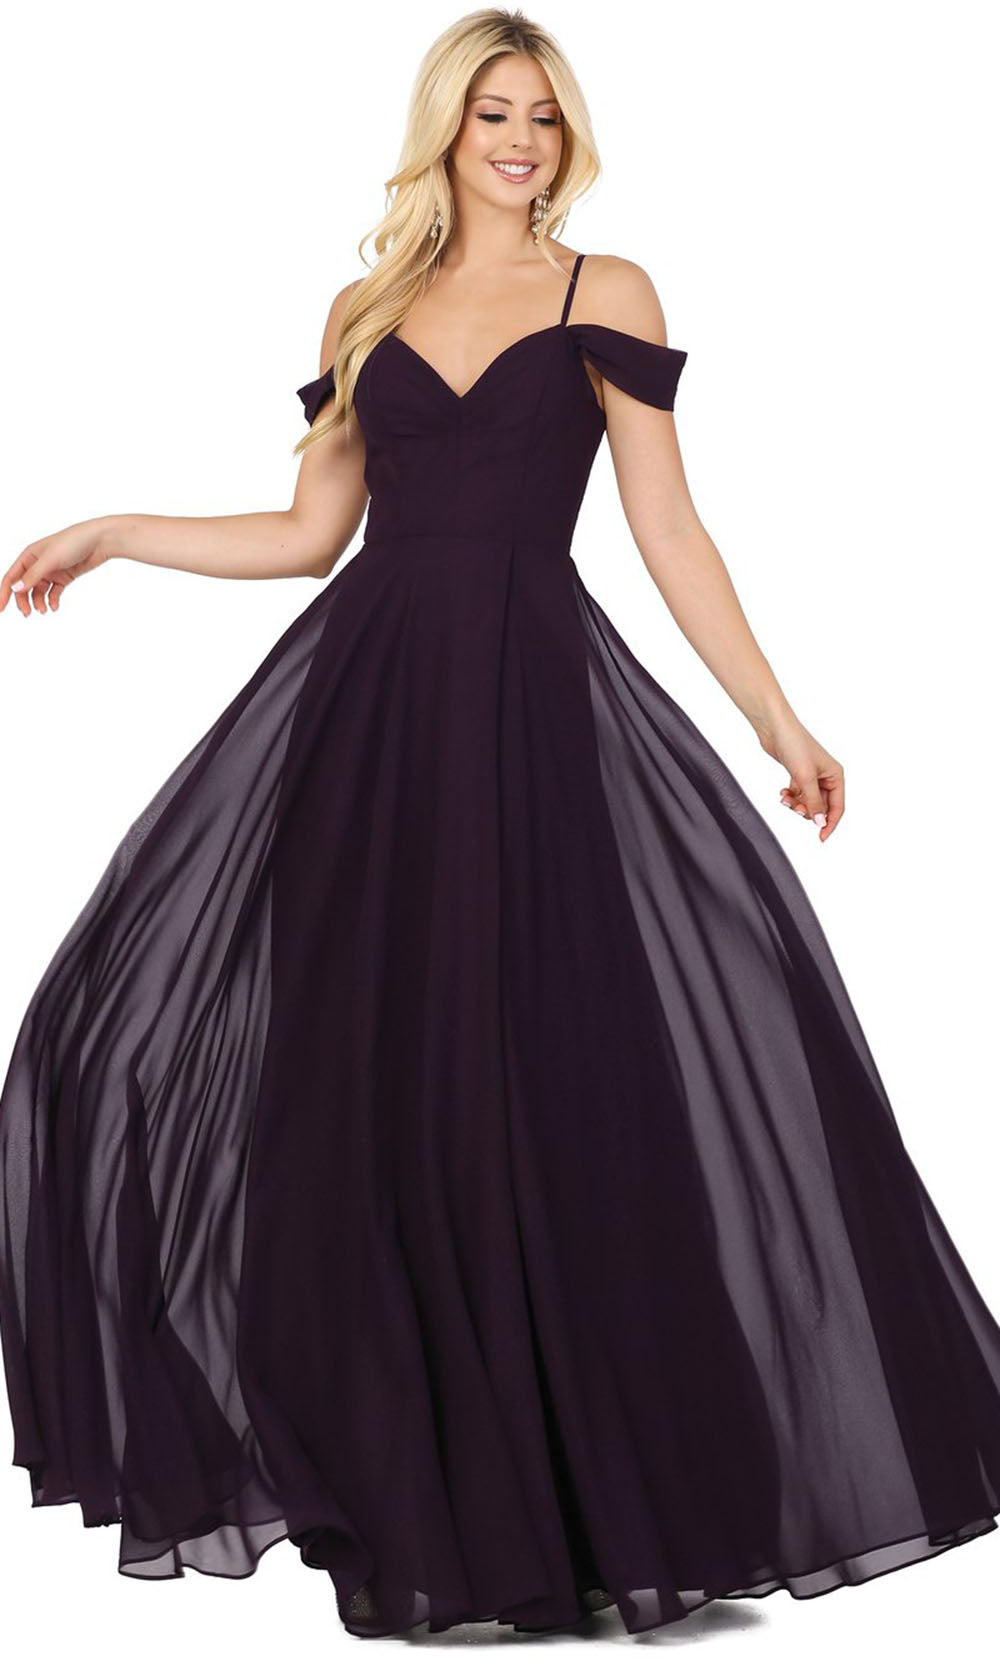 Dancing Queen - 2961 Sheer Lace Back Cold-Shoulders A-Line Gown In Purple